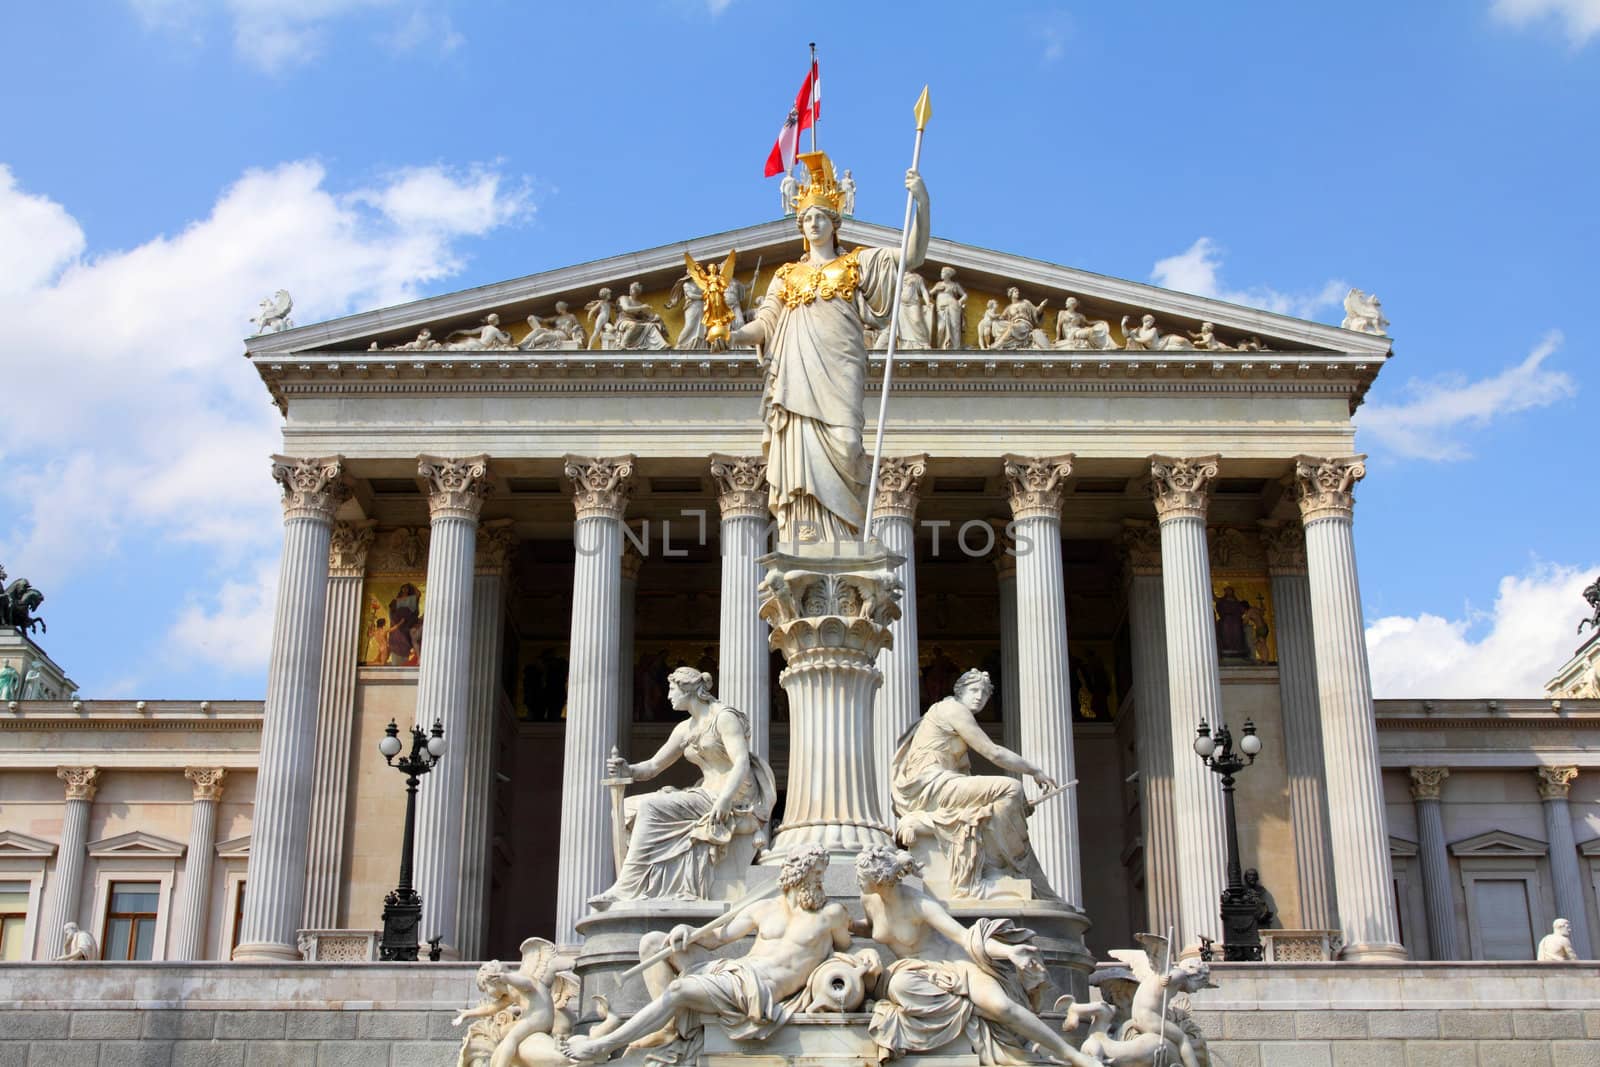 Vienna, Austria - Parliament of Austria. The Old Town is a UNESCO World Heritage Site.